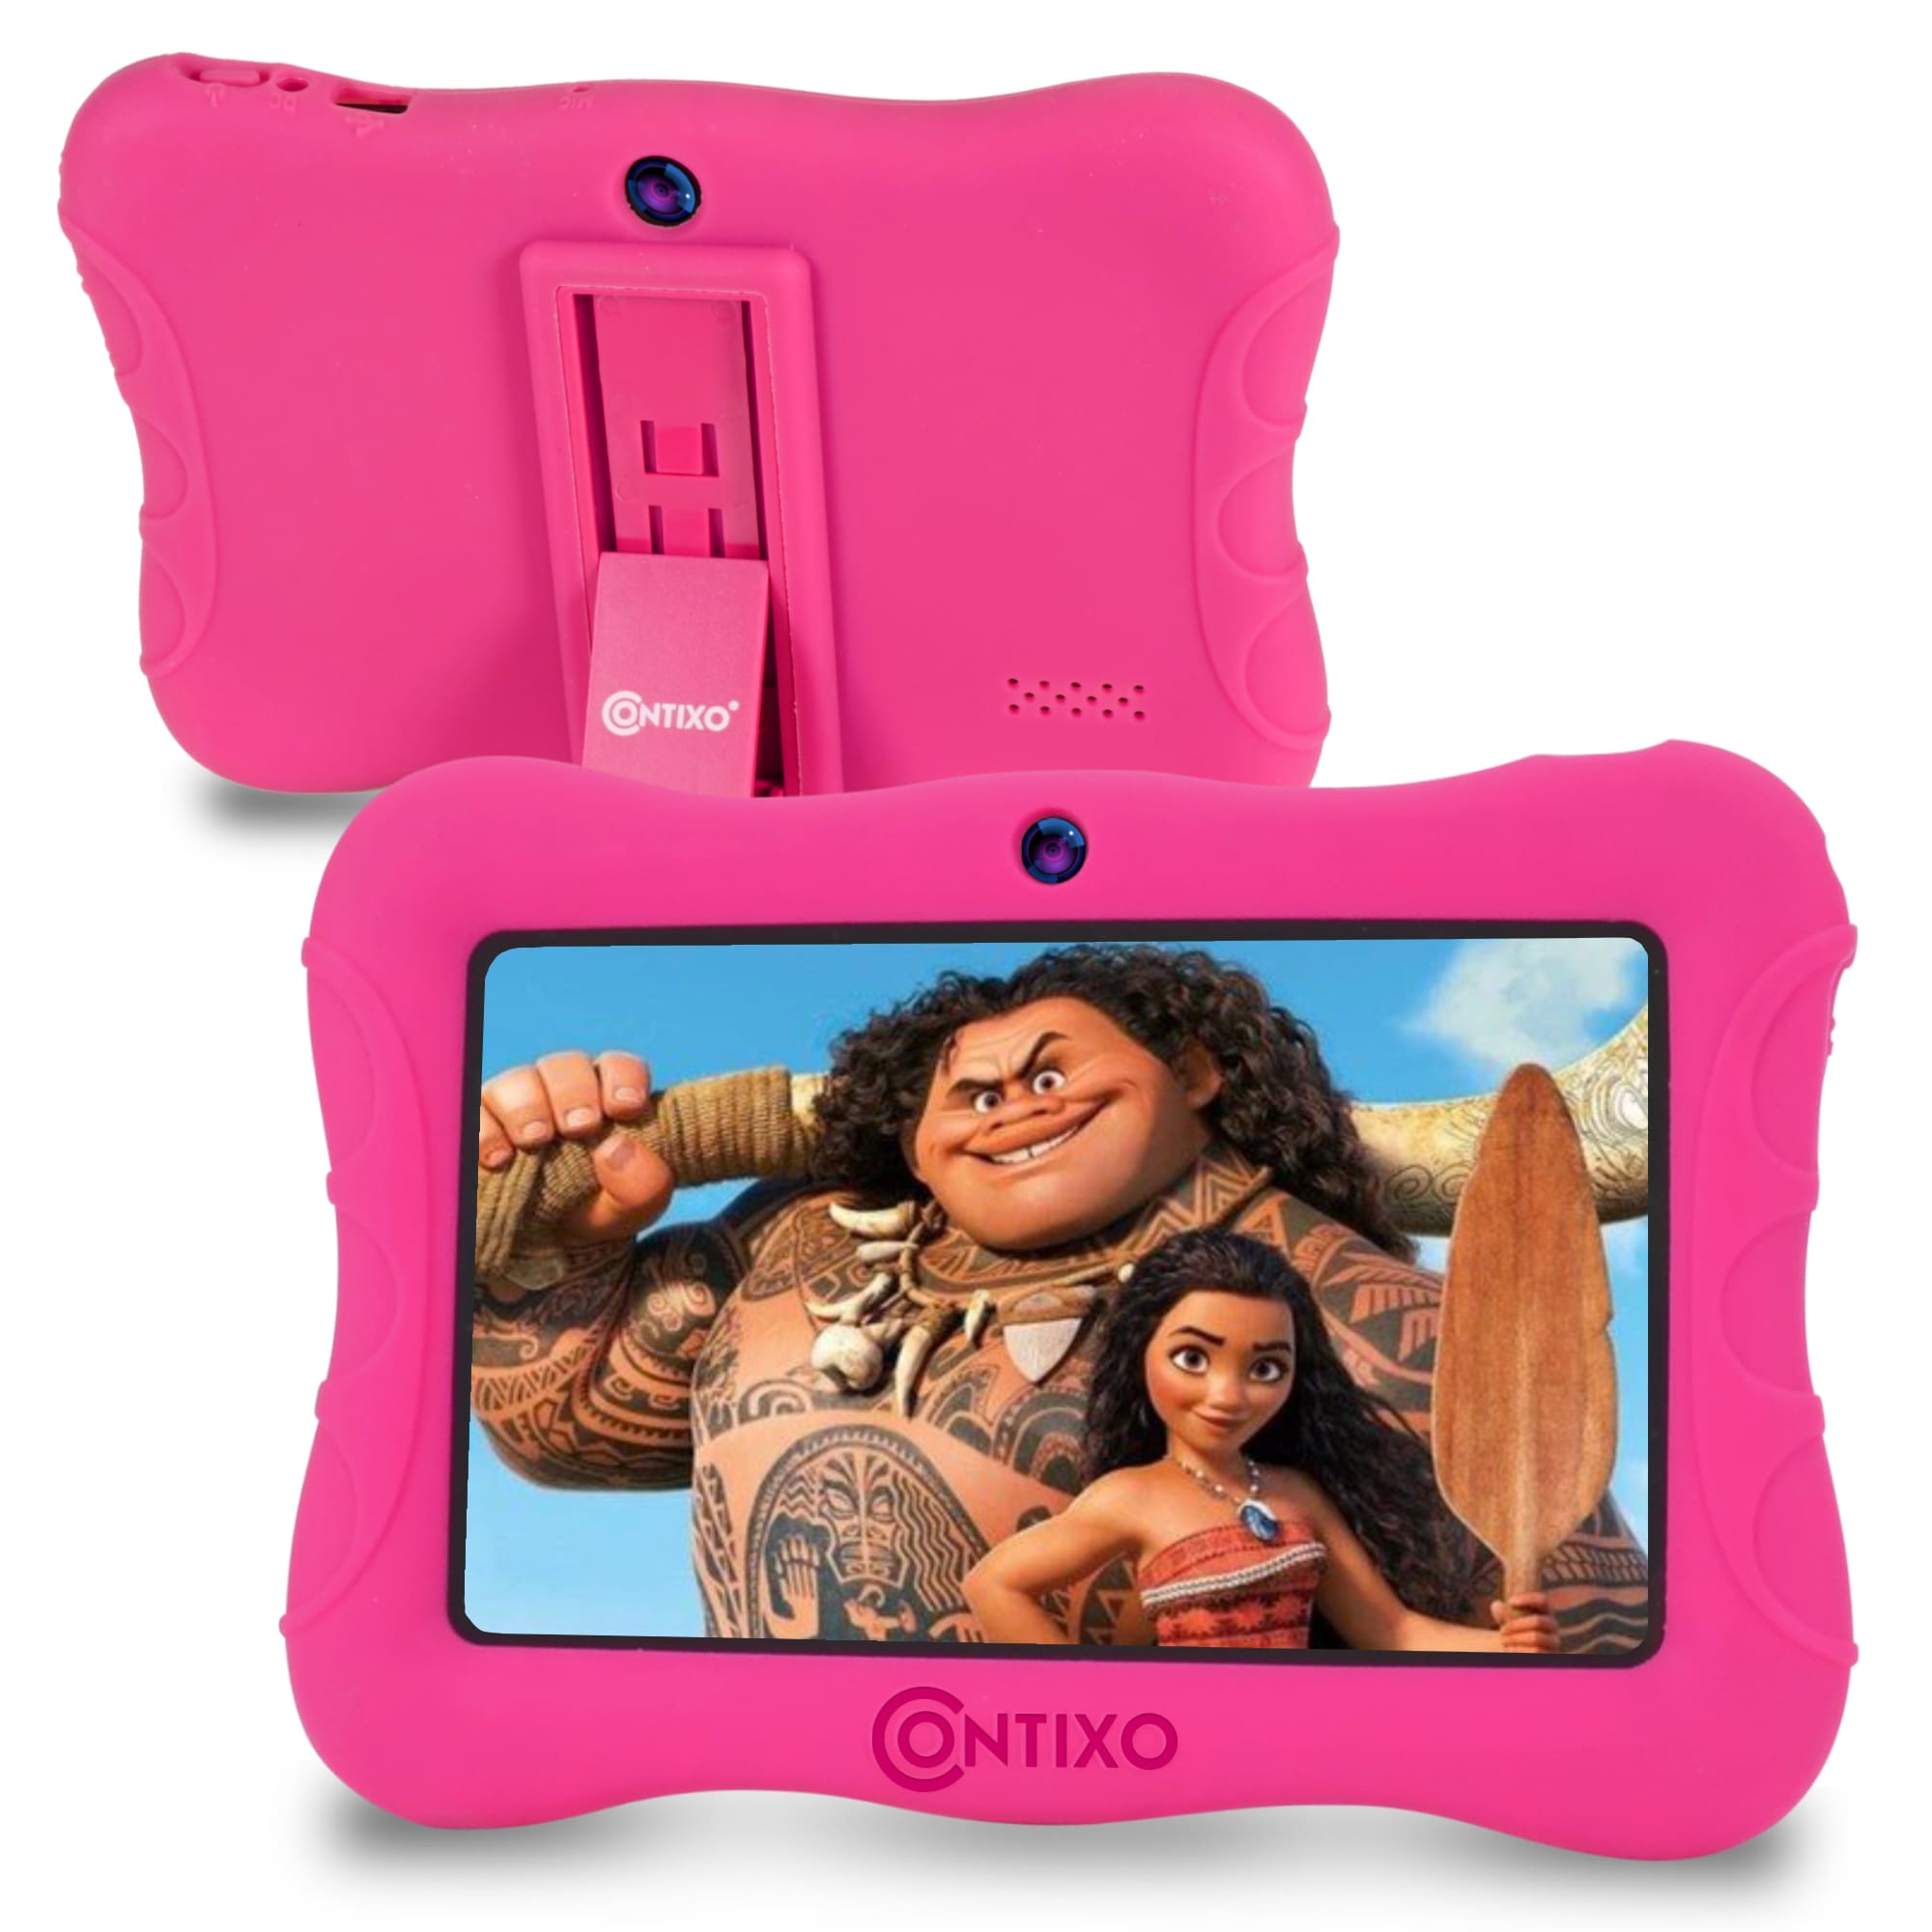 Contixo Contixo 7 inch Kids Tablet 2GB Ram 32GB Data Storage with Latest Android 10 OS Wi-Fi Blue Tooth Tablets for Kids, V9-3-32-Pink | V9-3-32 PINK